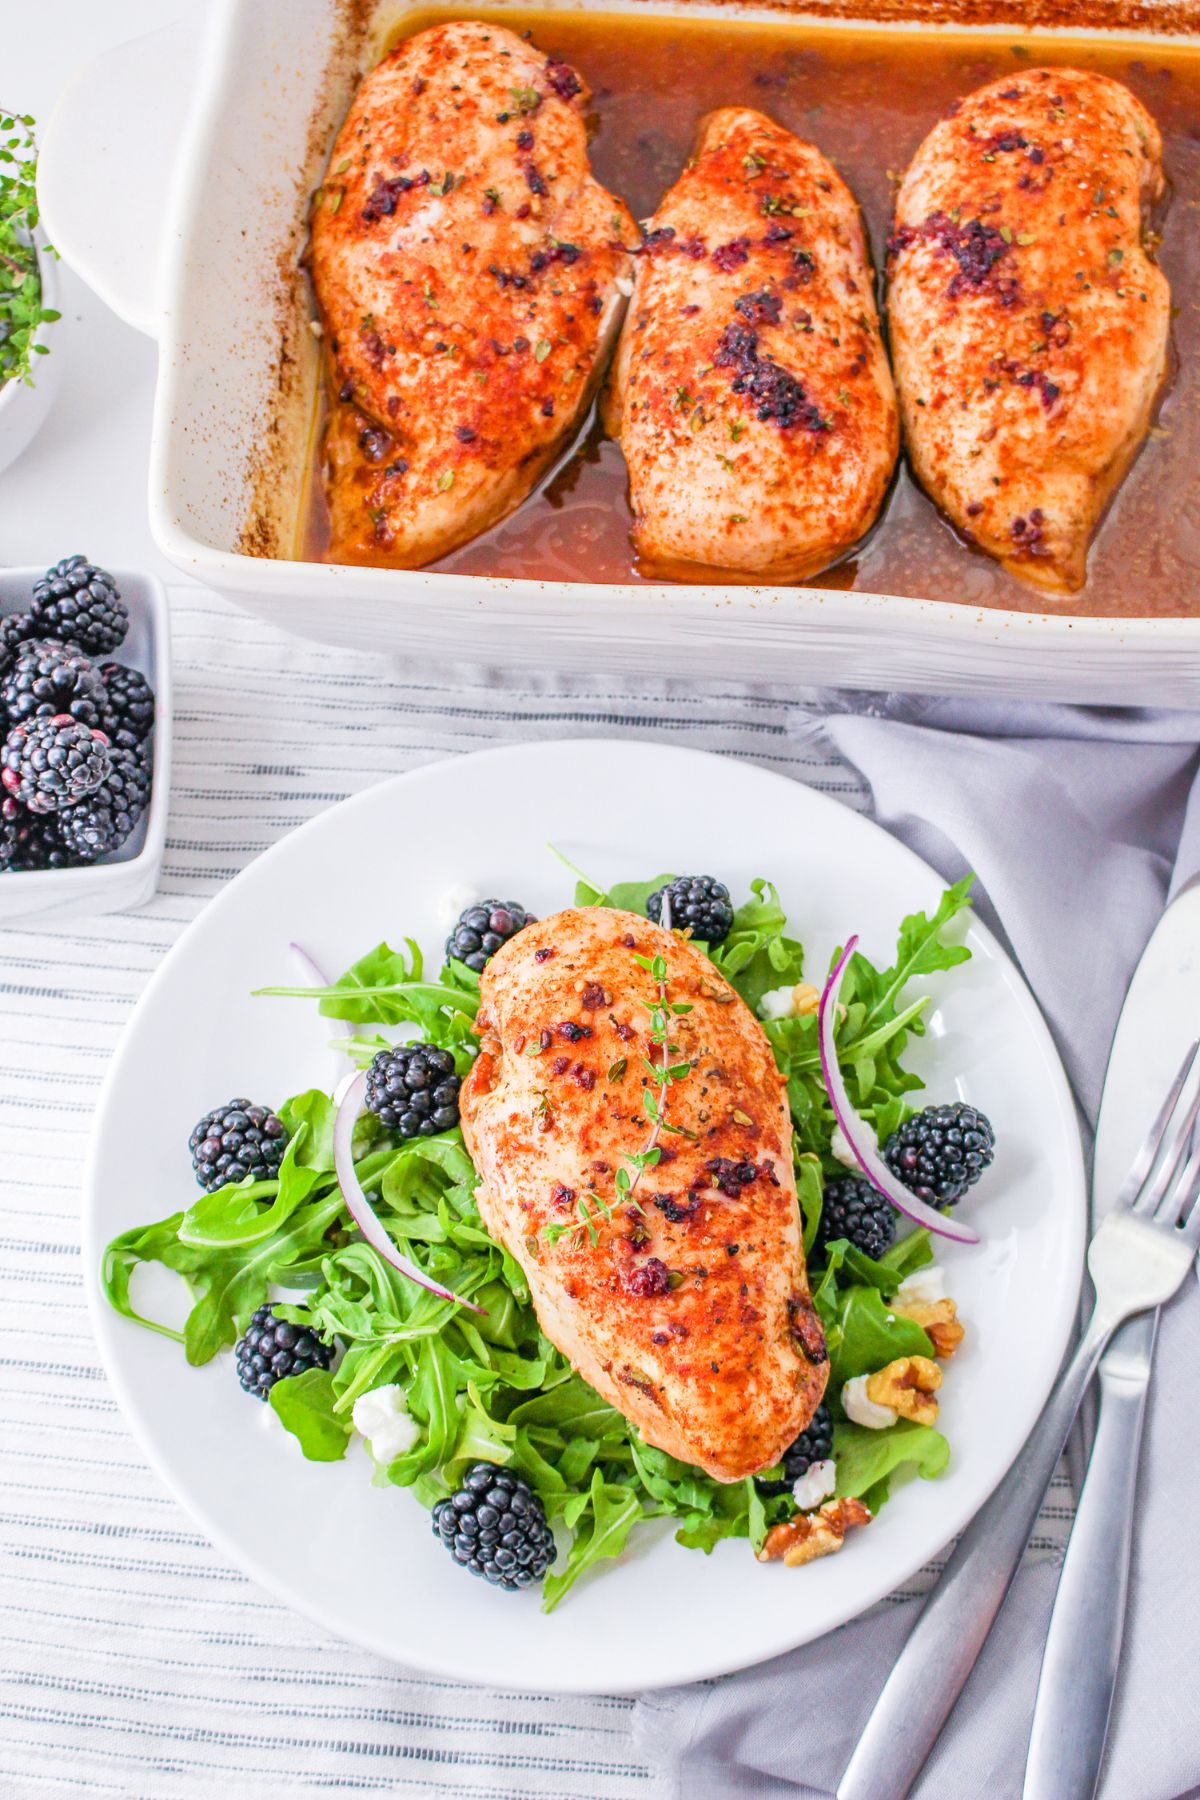 A baked chicken breast with blackberry glaze on a bed of lettuce.